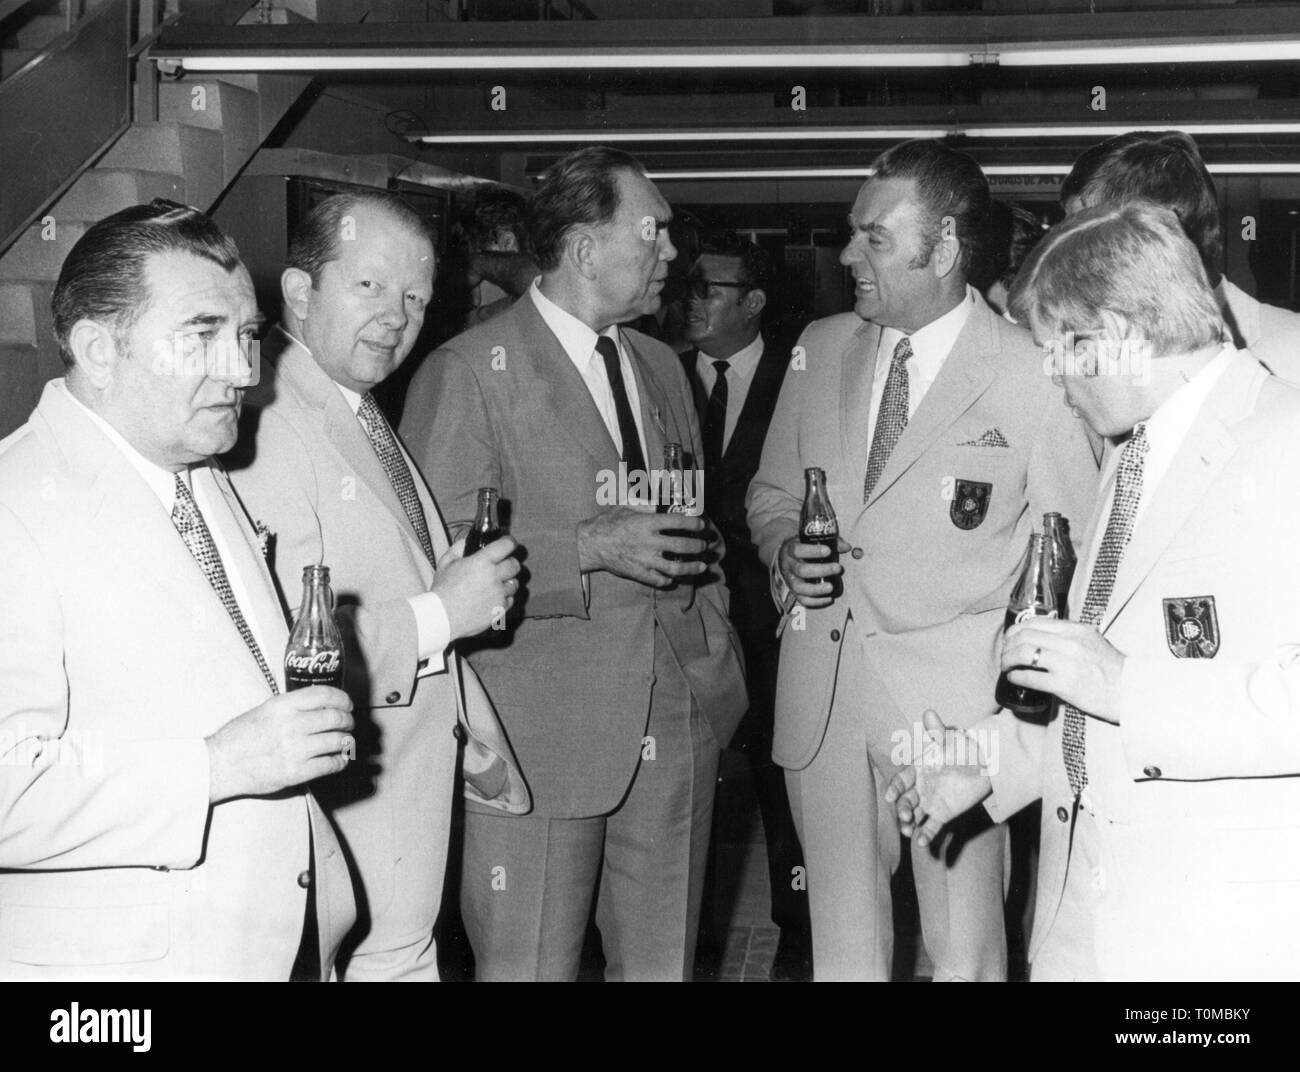 sports, football, functionaries, Germany, world championship in Mexico 1970, from left: Hans Deckert, vice president of the German Football Association Hermann Neuberger, Max Schmeling, Willi Huebner and Helmut Haller, press centre, Leon, 1970, Football World Cup, Soccer World Cup, World Football Championship, soccer world championship, FIFA World Cup, DFB, conversation, conversations, talks, talking, talk, speak, speaking, beverage, beverages, Coca Cola, bottles, bottle, suit, suits, clothes, 1970s, 70s, 20th century, people, group, groups, men,, Additional-Rights-Clearance-Info-Not-Available Stock Photo